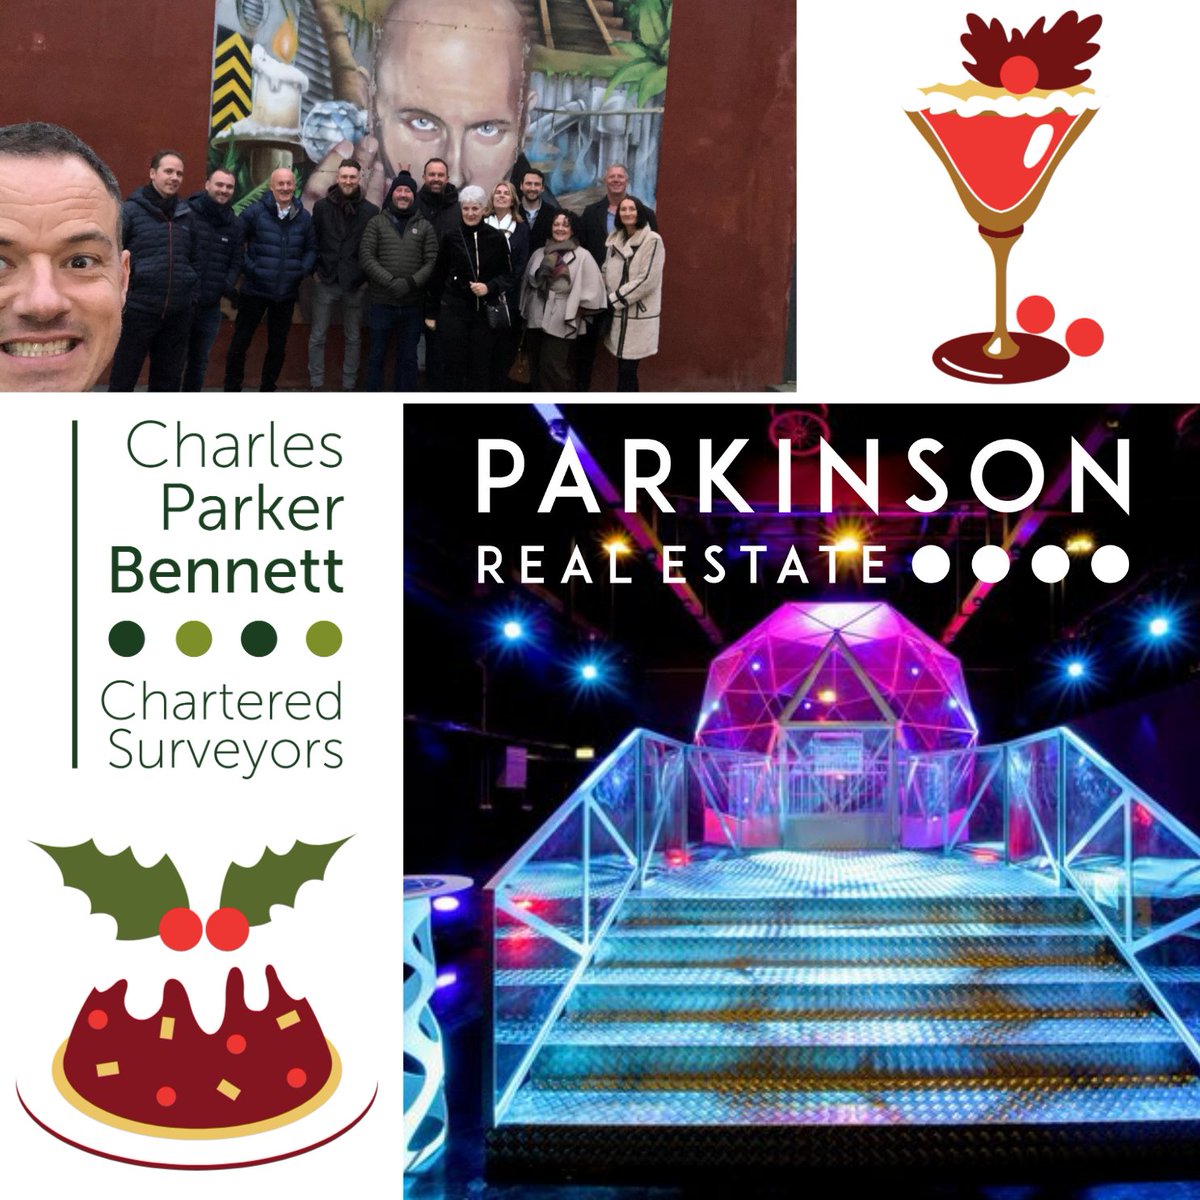 This year’s staff Christmas Party, we decided to mix things up a little and booked into the Crystal Maze in Manchester before the standard meal and drinks with the team.  Would highly recommend for something a little different!

#CharlesParkerBennett #ParkinsonRealEstate